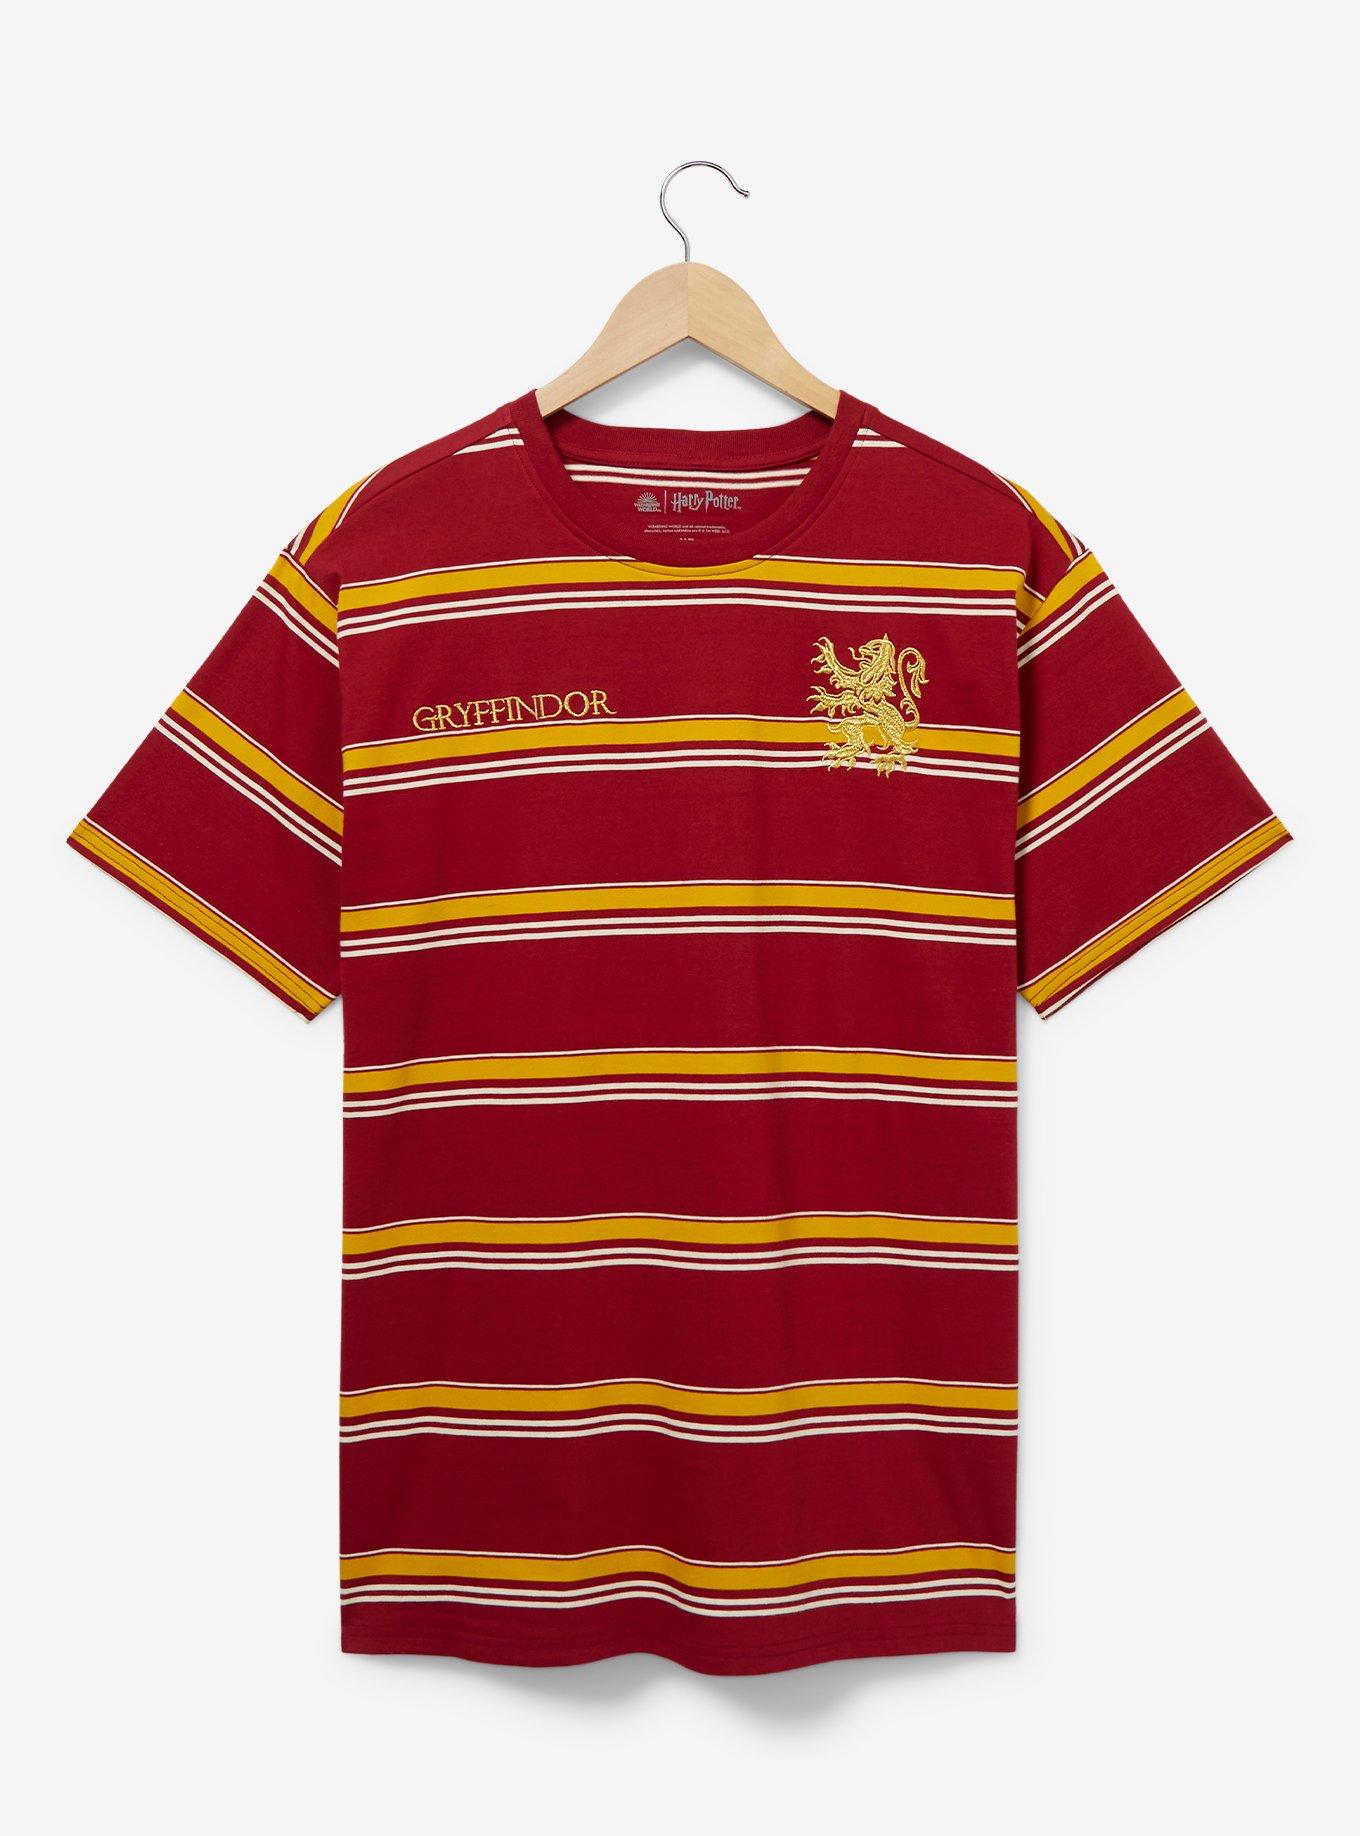 Harry Potter Striped Gryffindor T-Shirt BoxLunch Exclusive | - Mascot BoxLunch